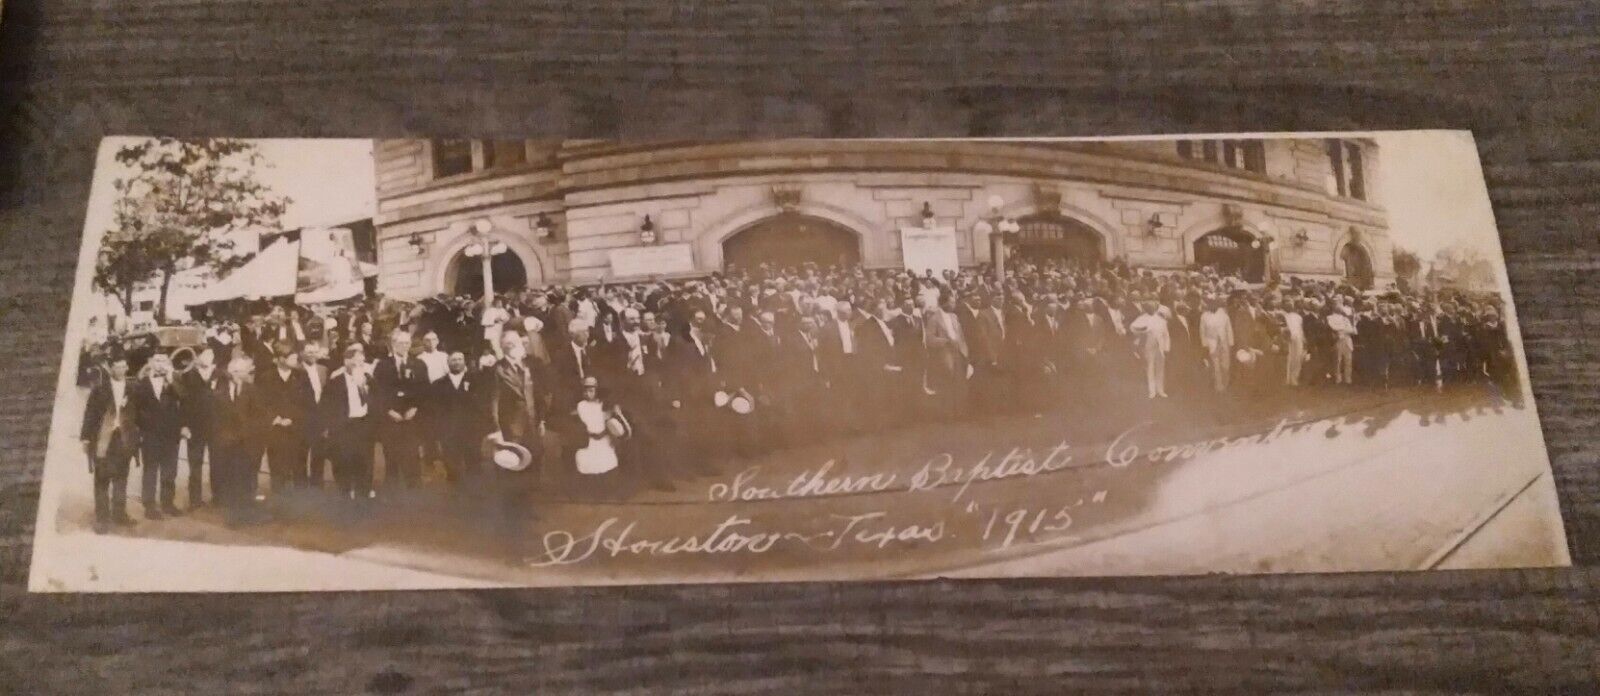 1915 Southern Baptist Convention Houston Texas Post Card